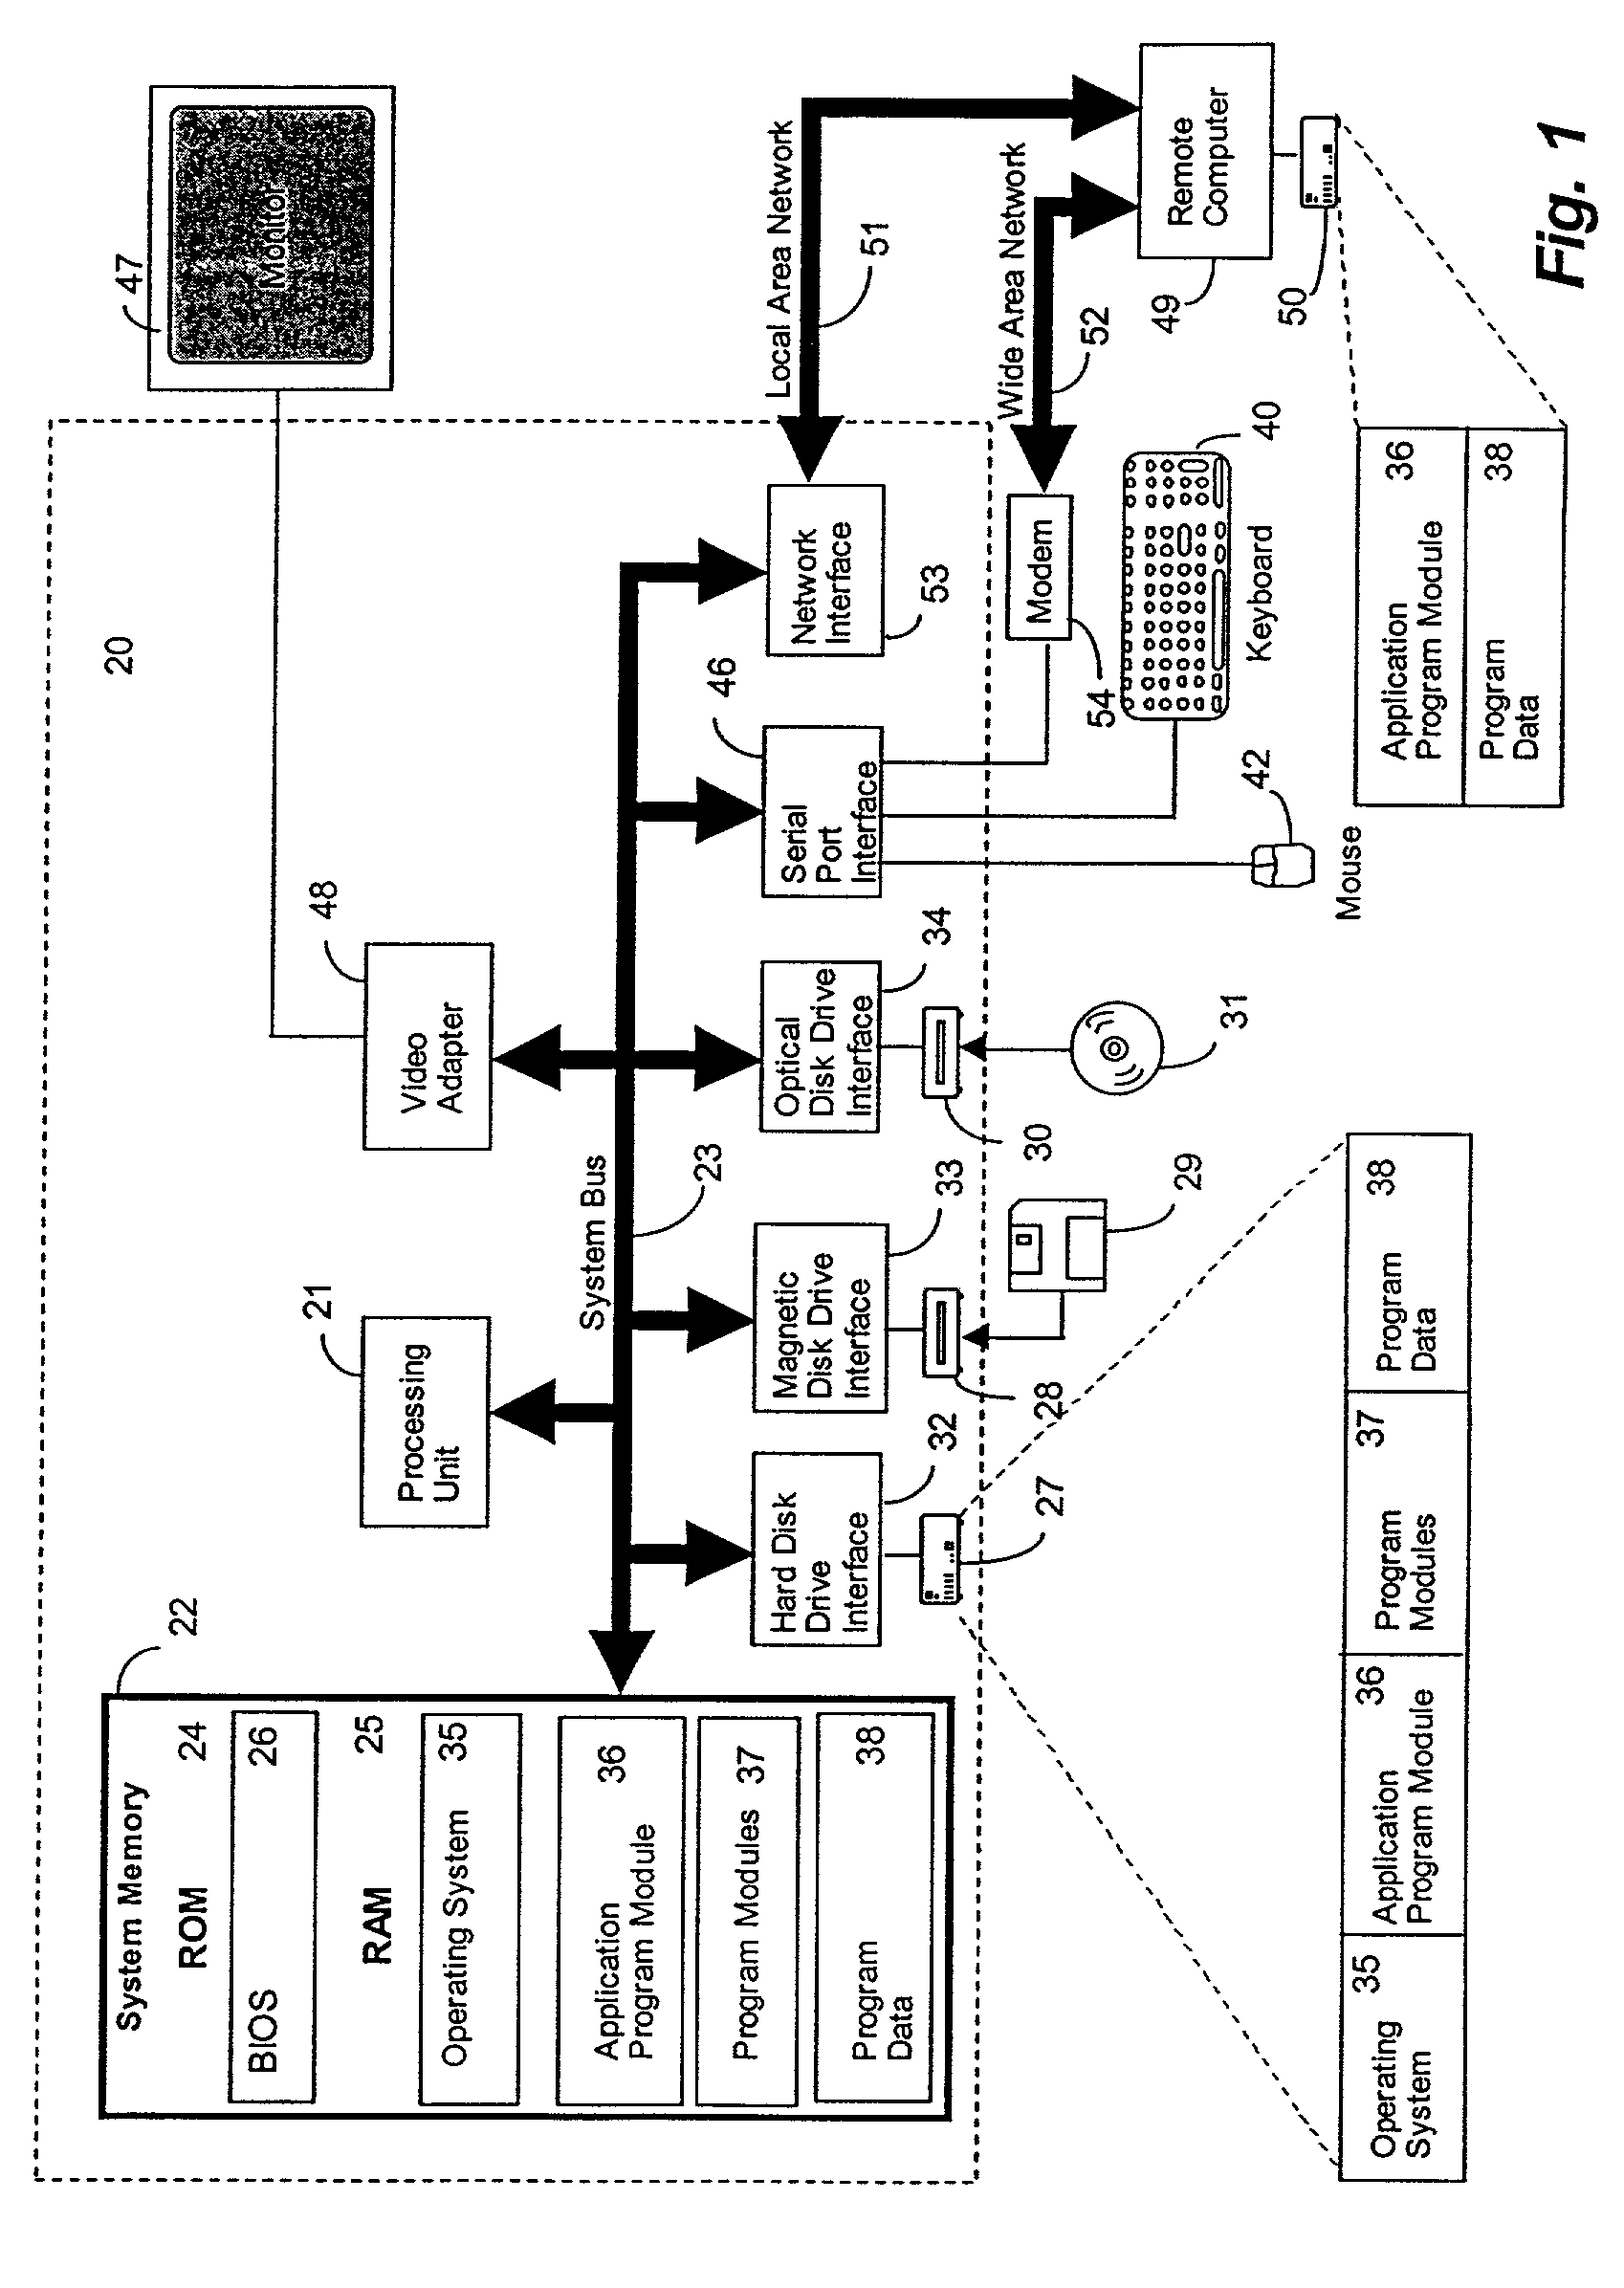 Method and system for providing electronic commerce actions based on semantically labeled strings